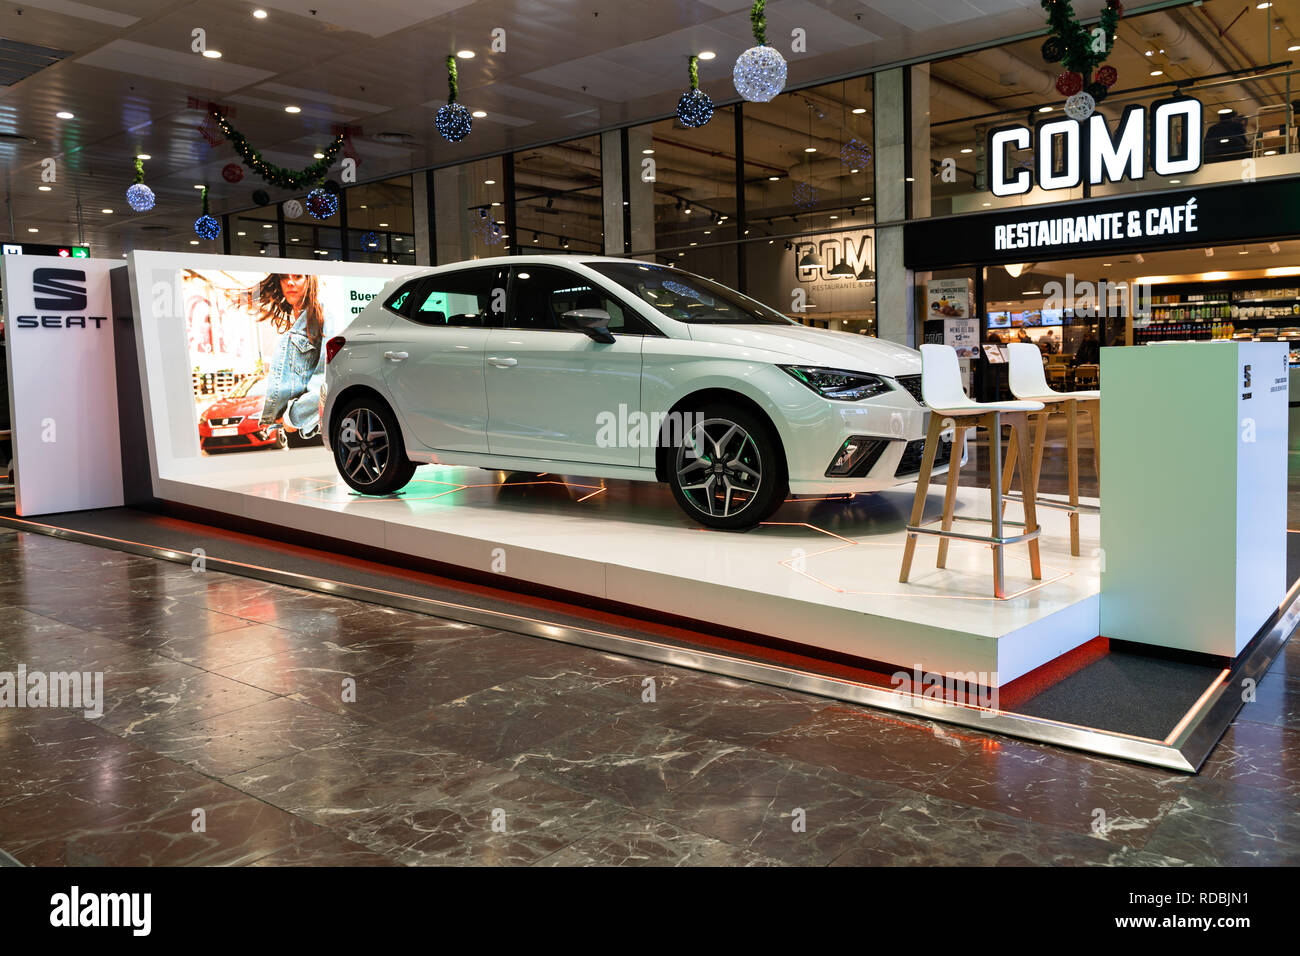 Seat Ibiza stand model 2019 at the Barcelona Sants train station, advertising, car sales. Barcelona, Spain Stock Photo